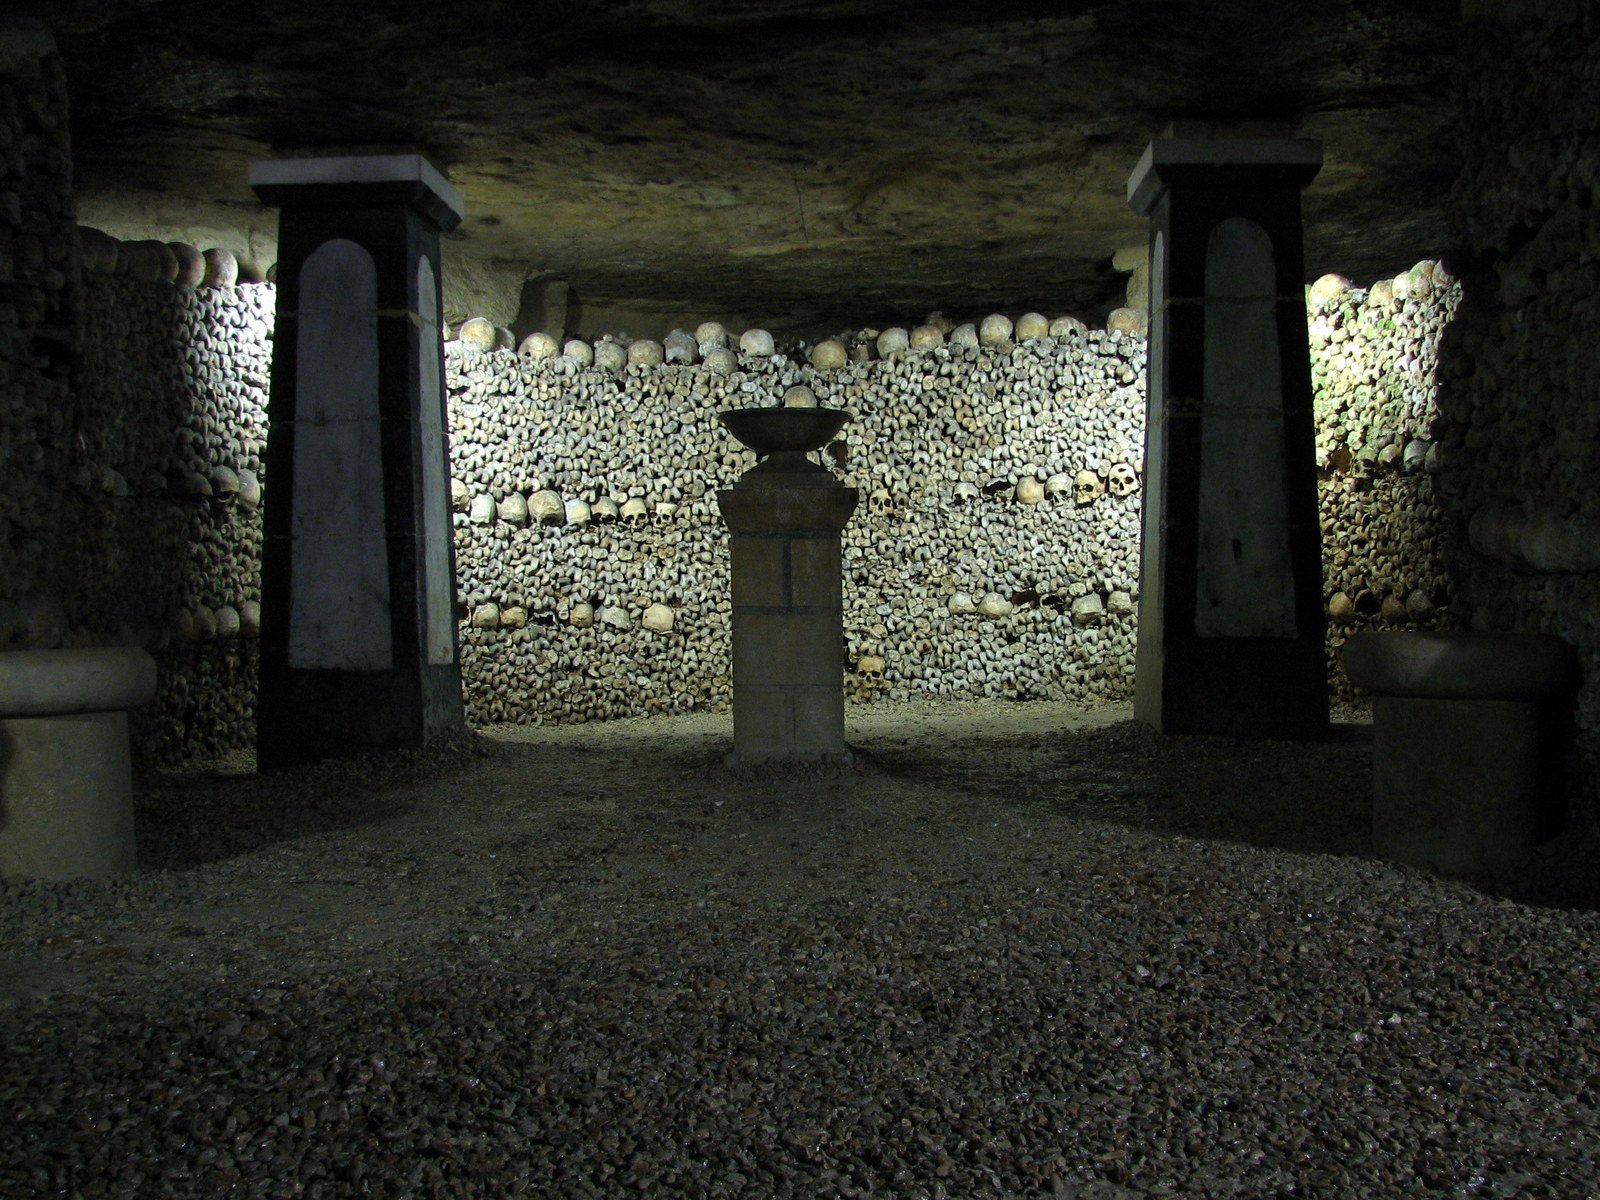 a white vase in an old stone building with skulls on the walls